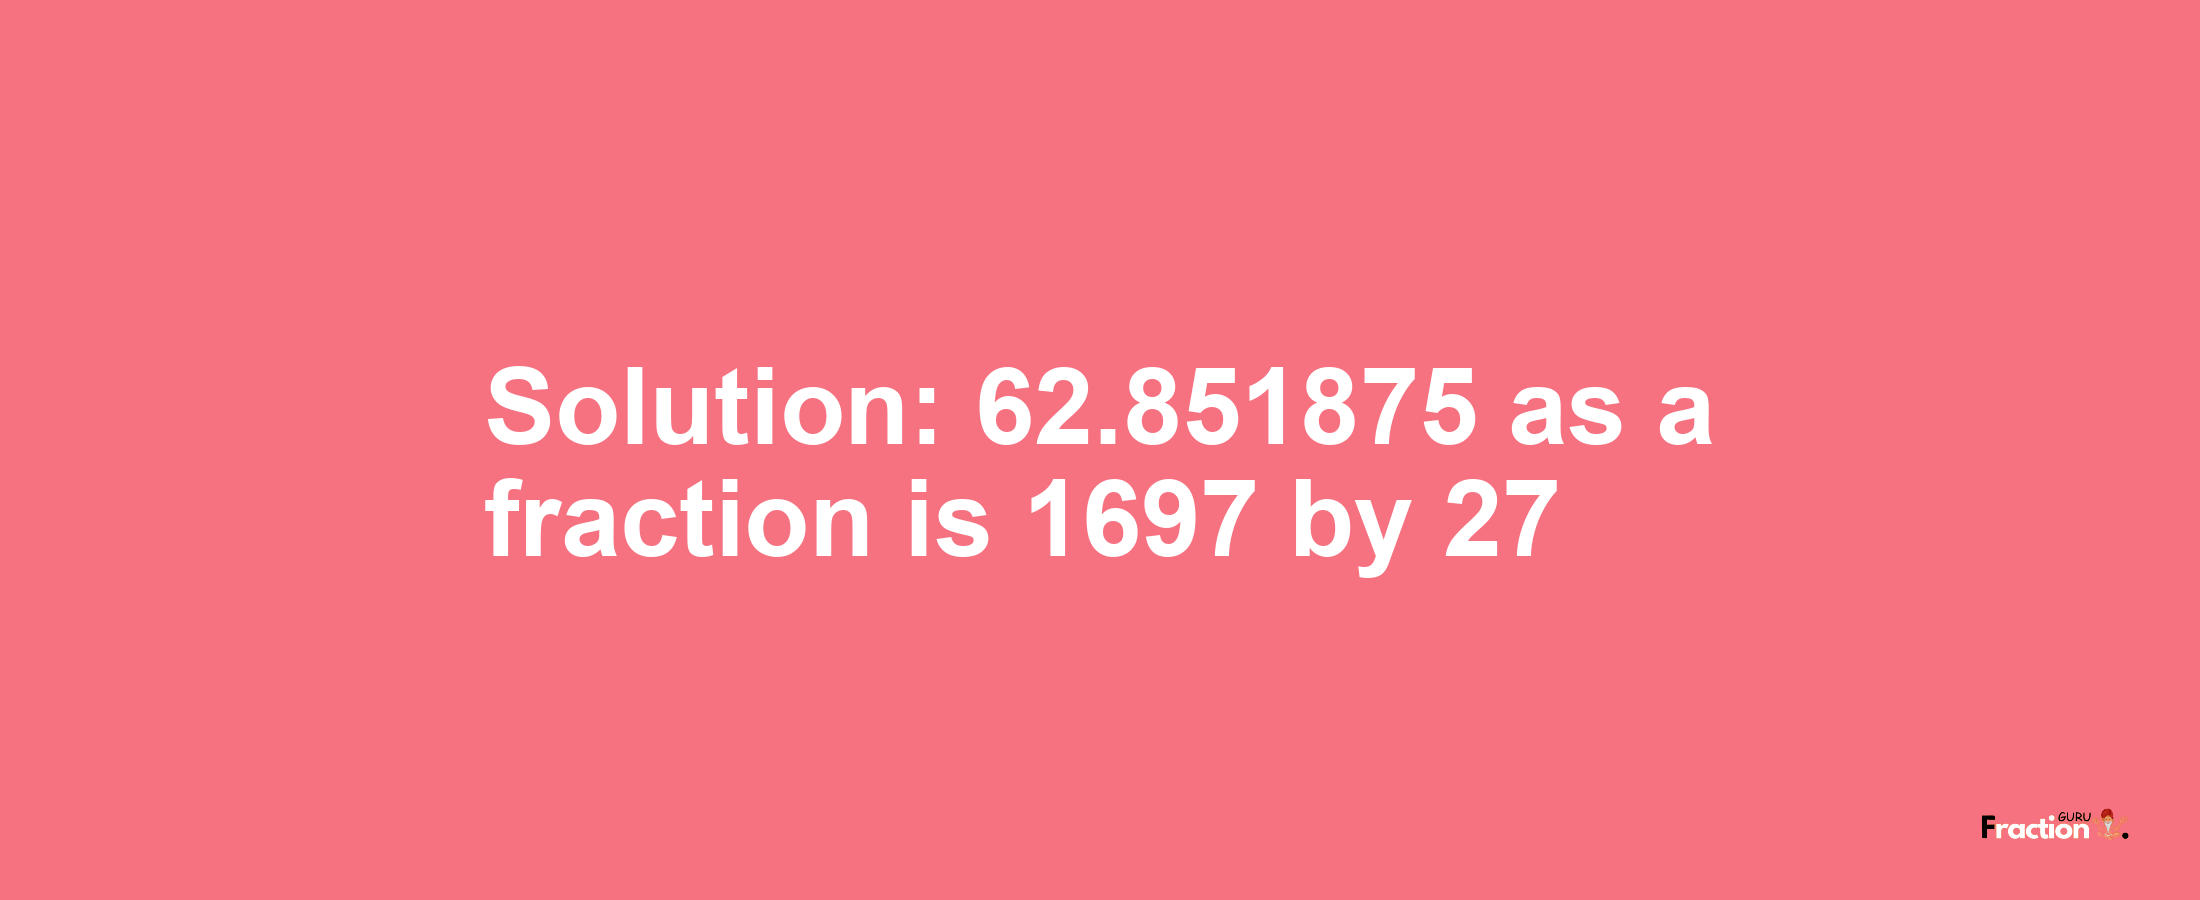 Solution:62.851875 as a fraction is 1697/27